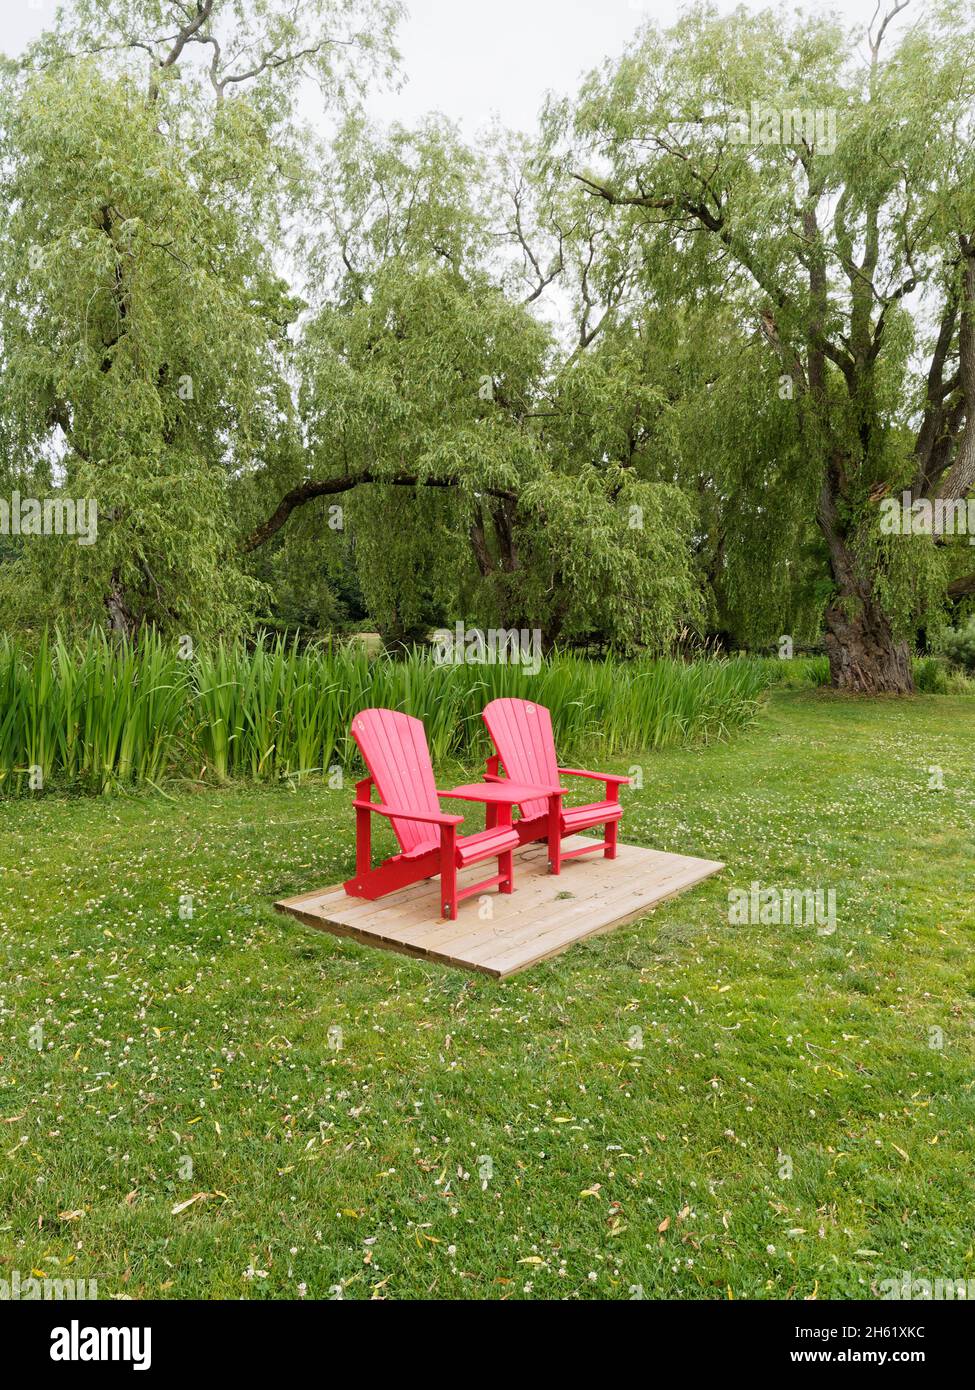 canada,grand-pré,grounds of memorial to acadian deportation,historic site,no photo release needed for tourism,no property release needed for tourism promotion,nova scotia,parks canada,parks canada red chairs Stock Photo